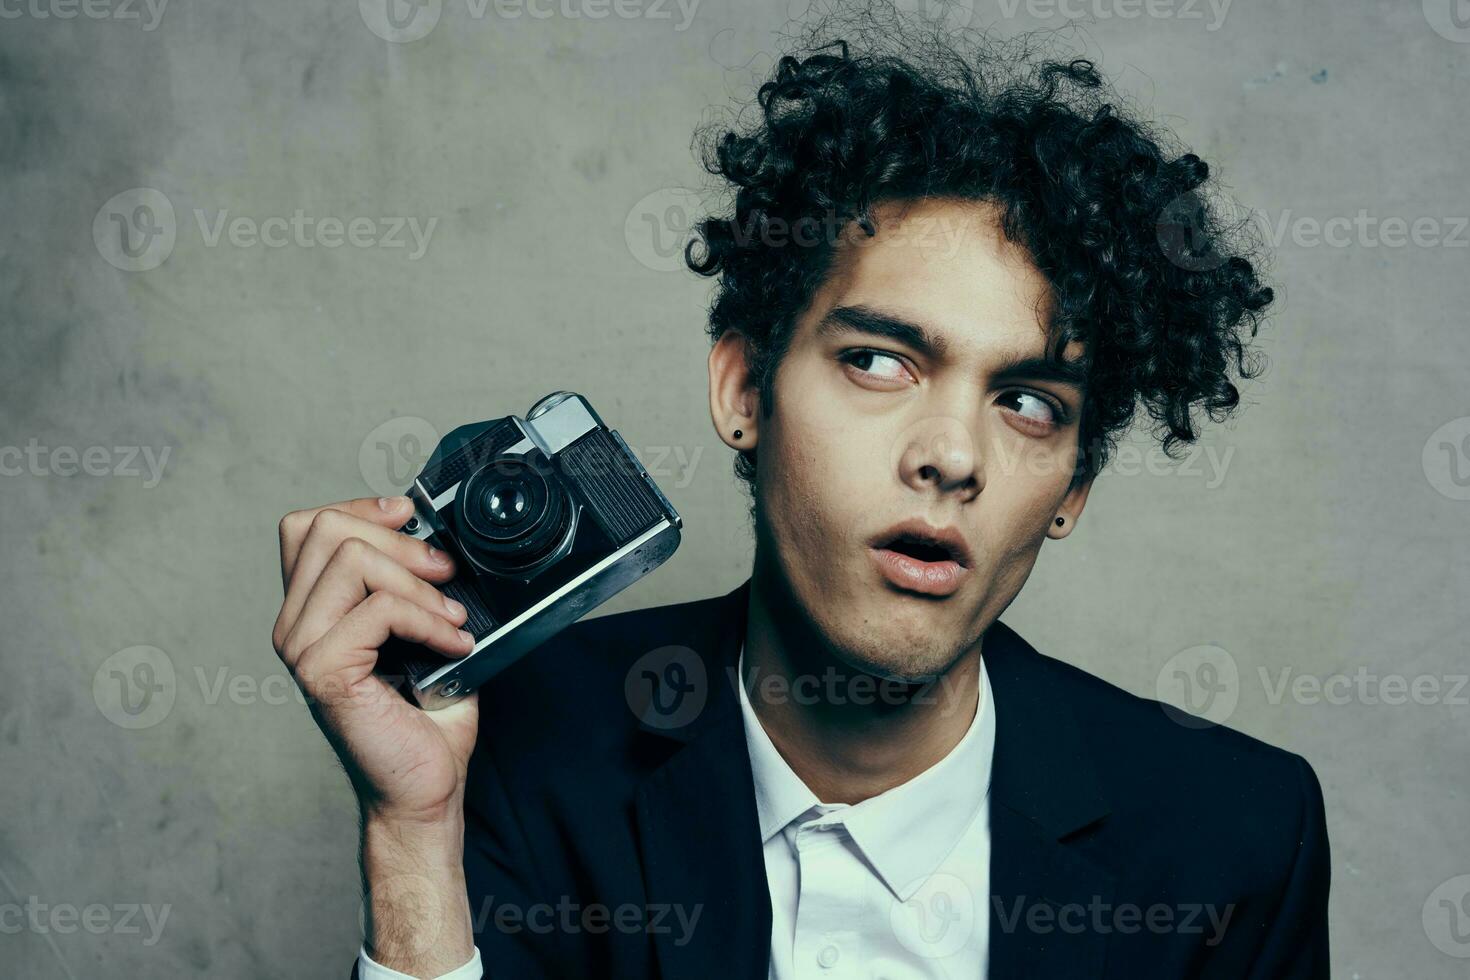 handsome guy in a suit with a camera lessons curly hair emotions model photo